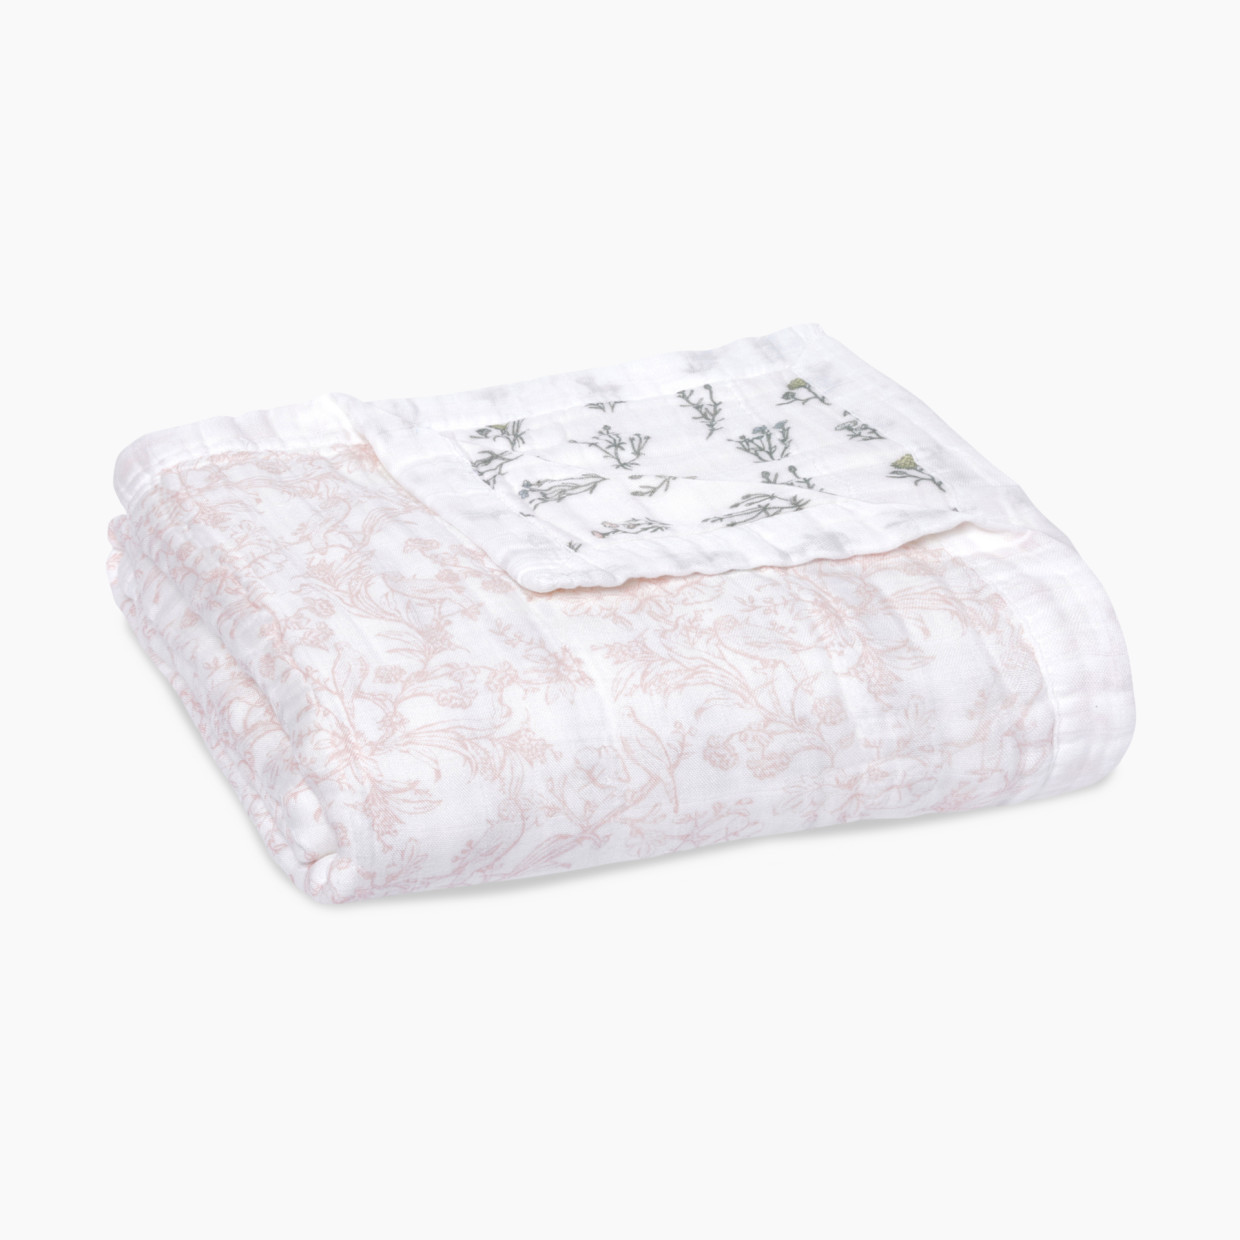 Aden + Anais Silky Soft Dream Blanket - French Floral.